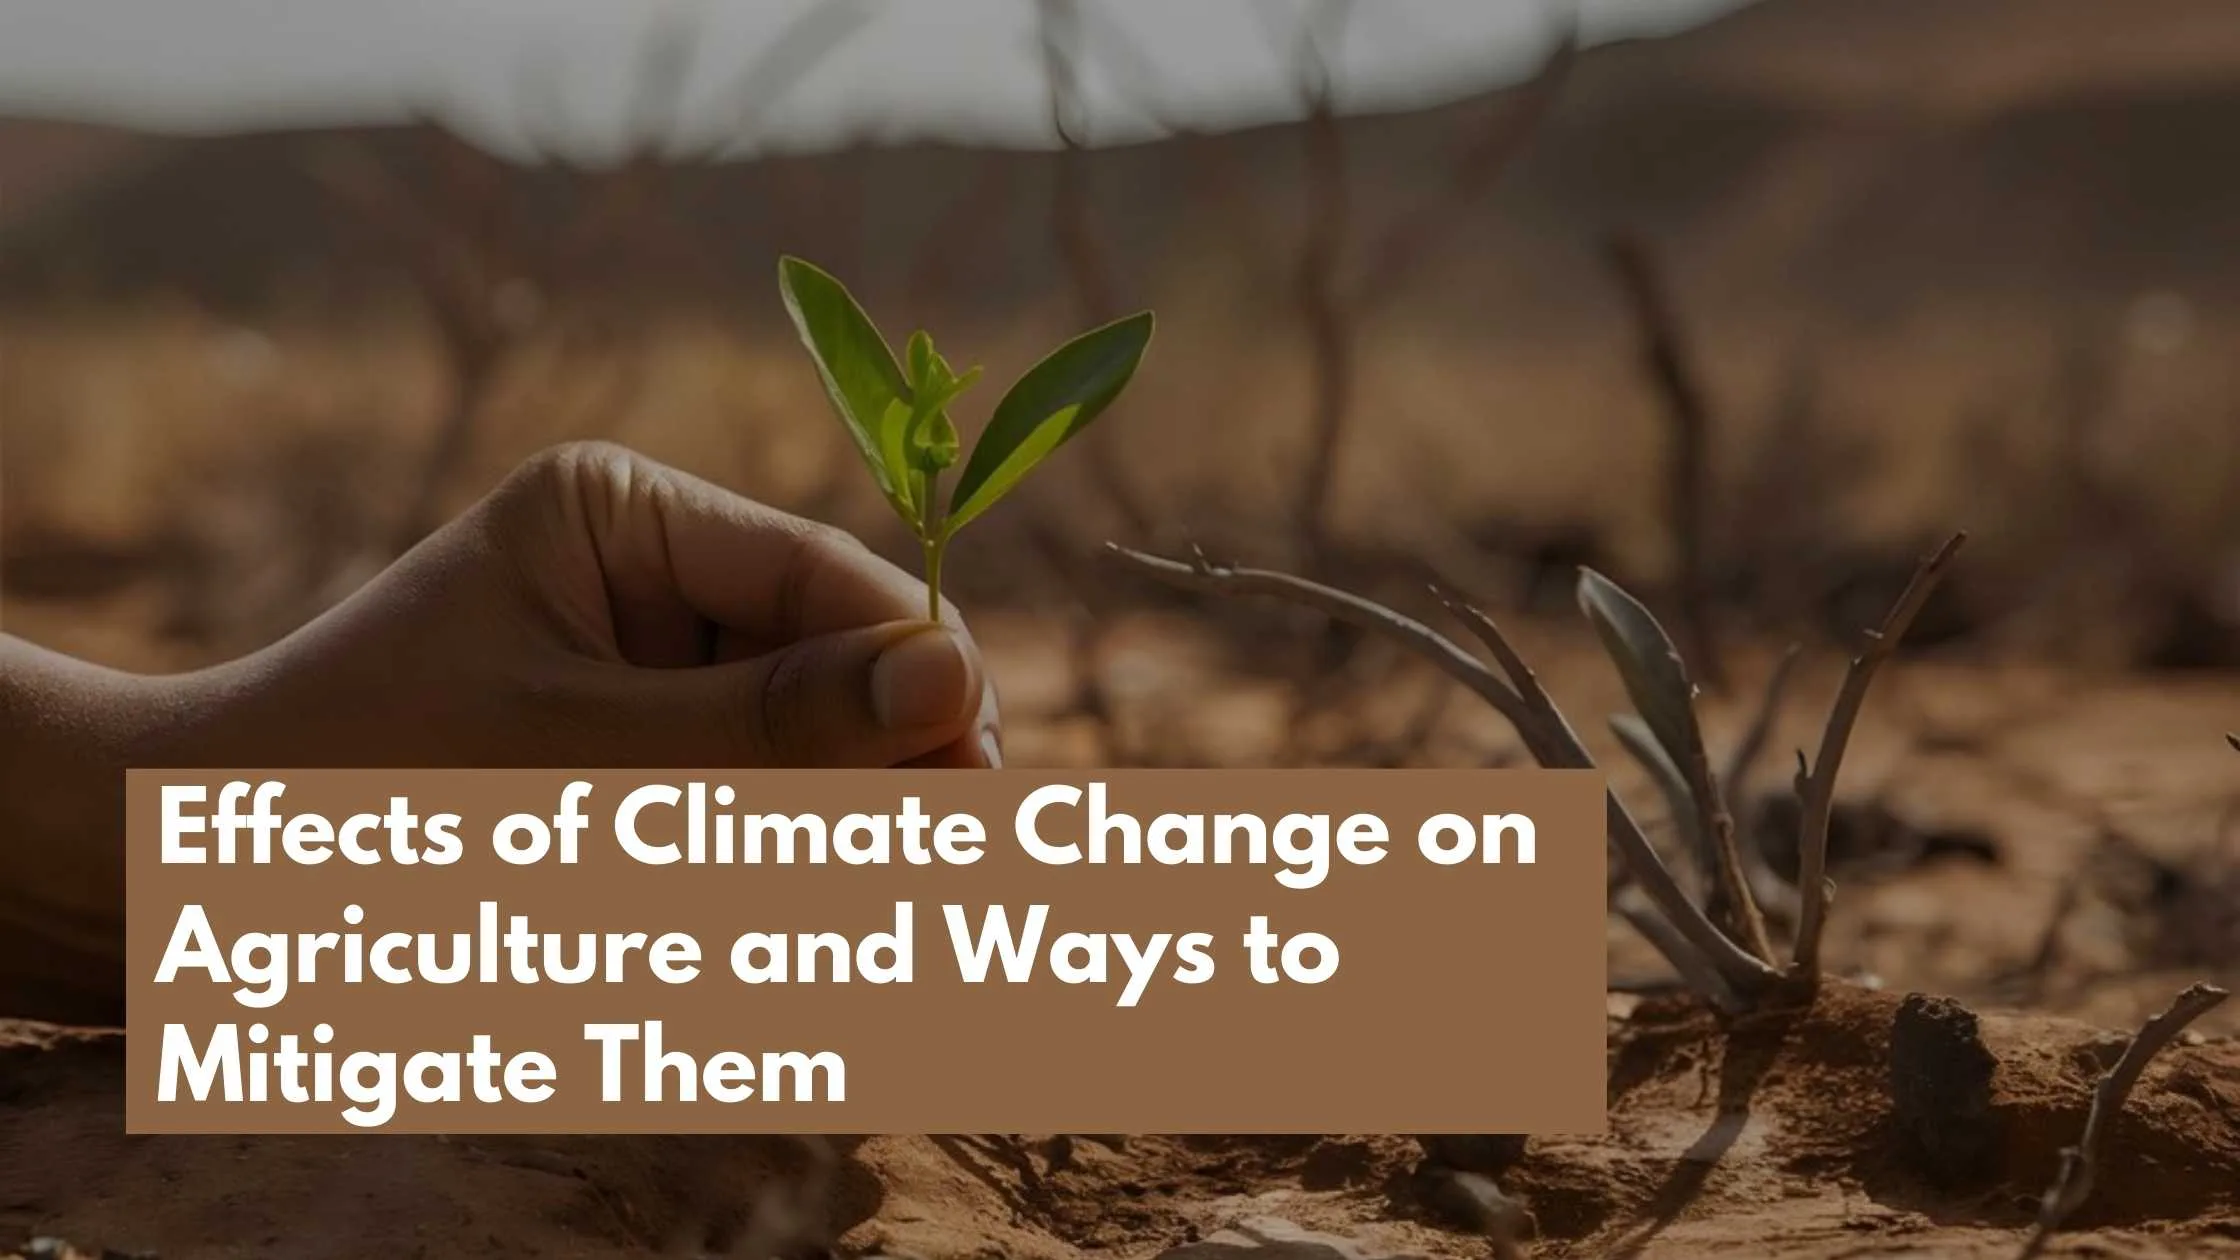 Effects of Climate Change on Agriculture and Ways to Mitigate Them